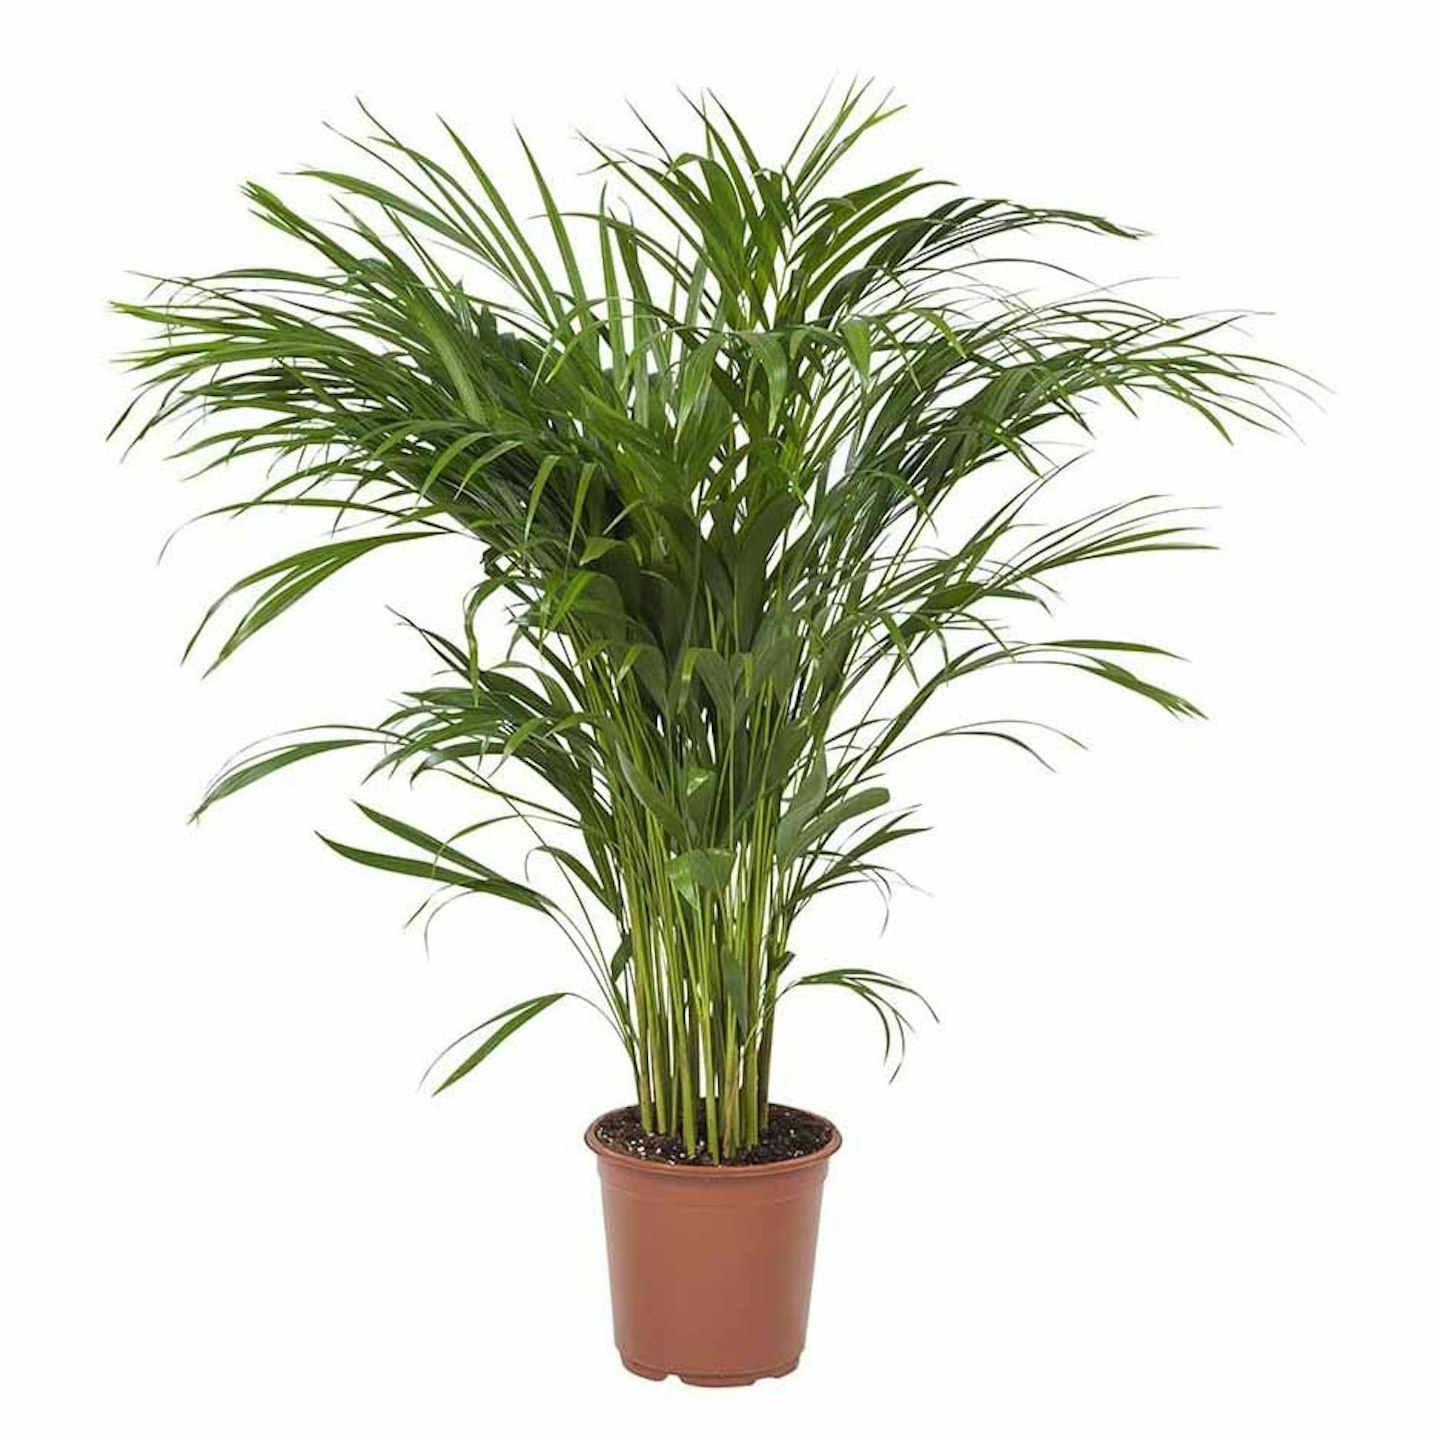 Palm Tree (Golden Cane Palm) - 90 cm Tall House Plant